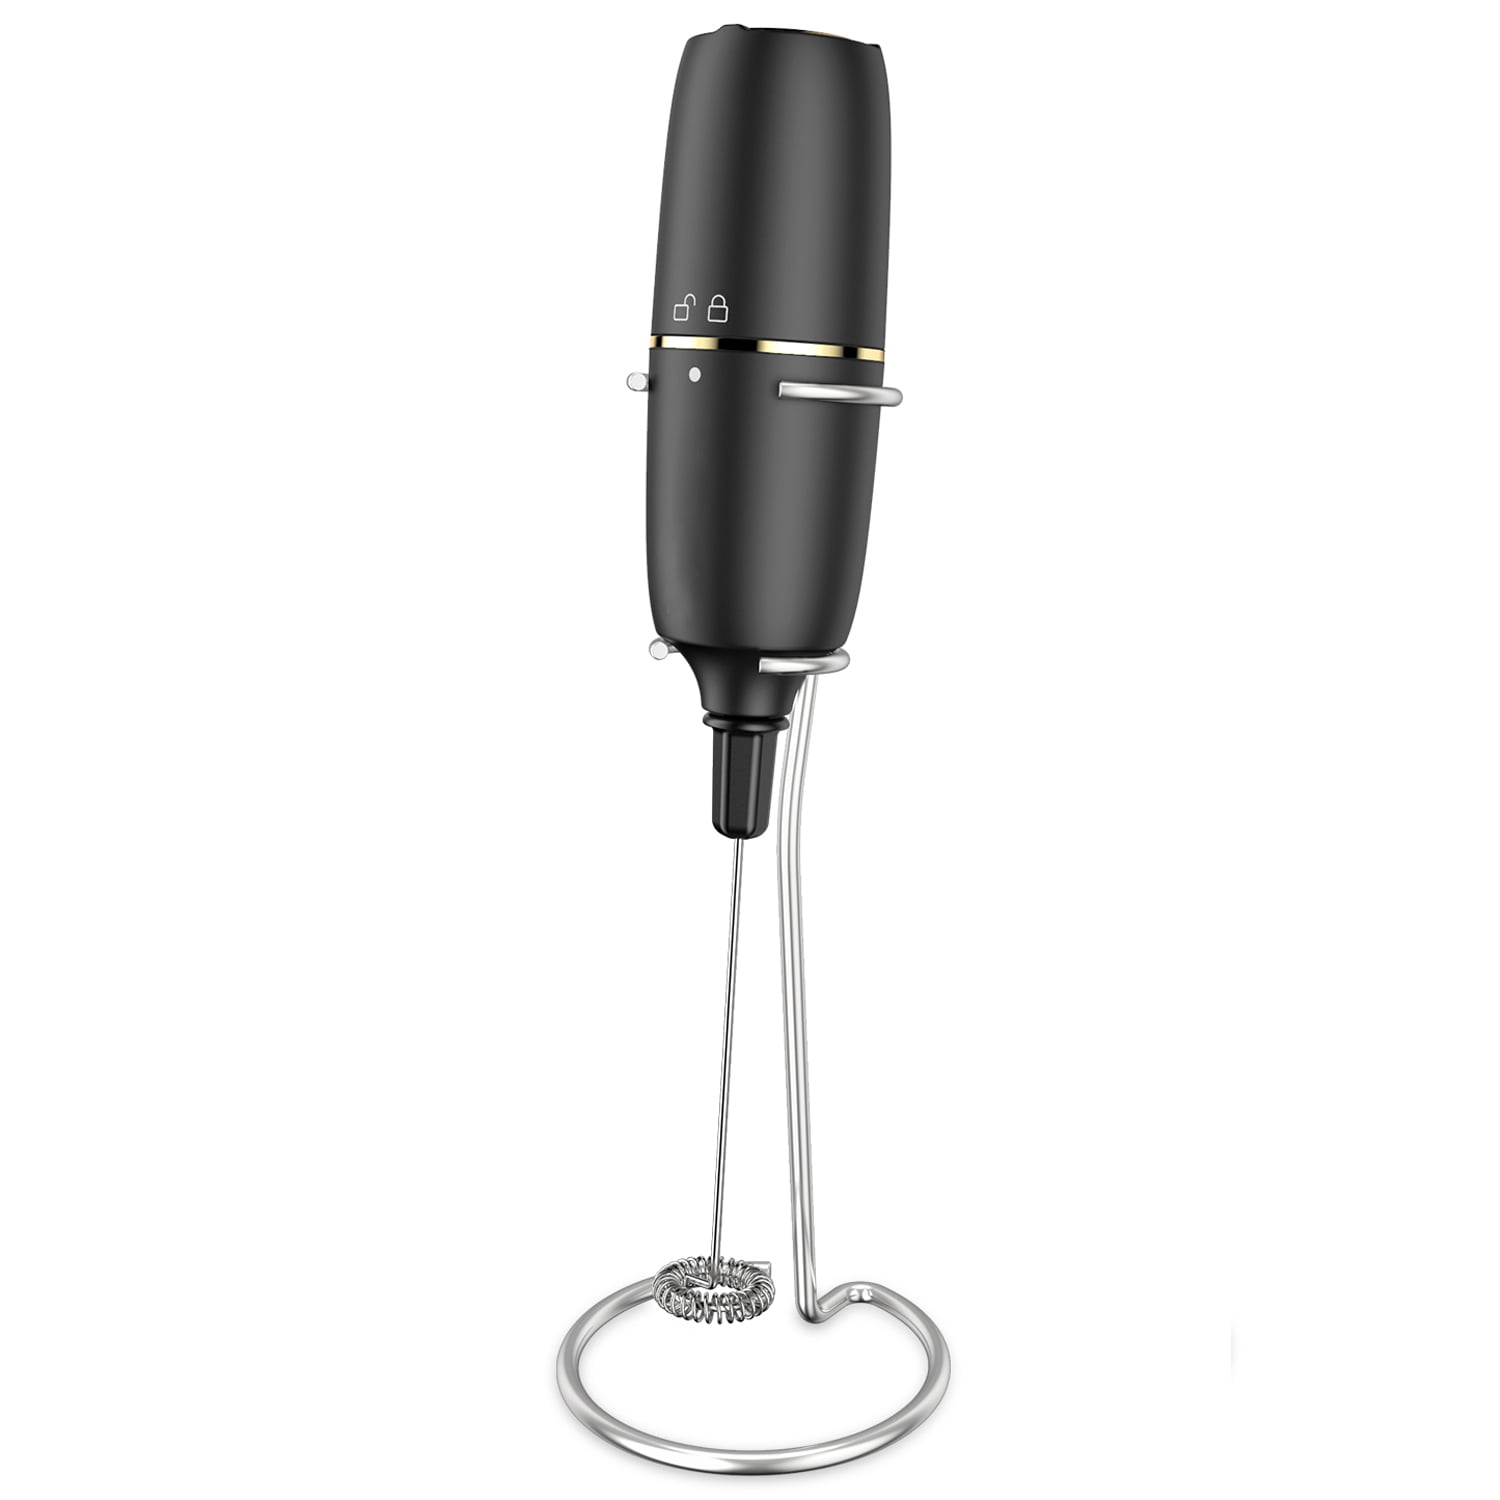 ELECTRIC MILK FROTHER (HANDHELD) – Chao Coffee and Tea